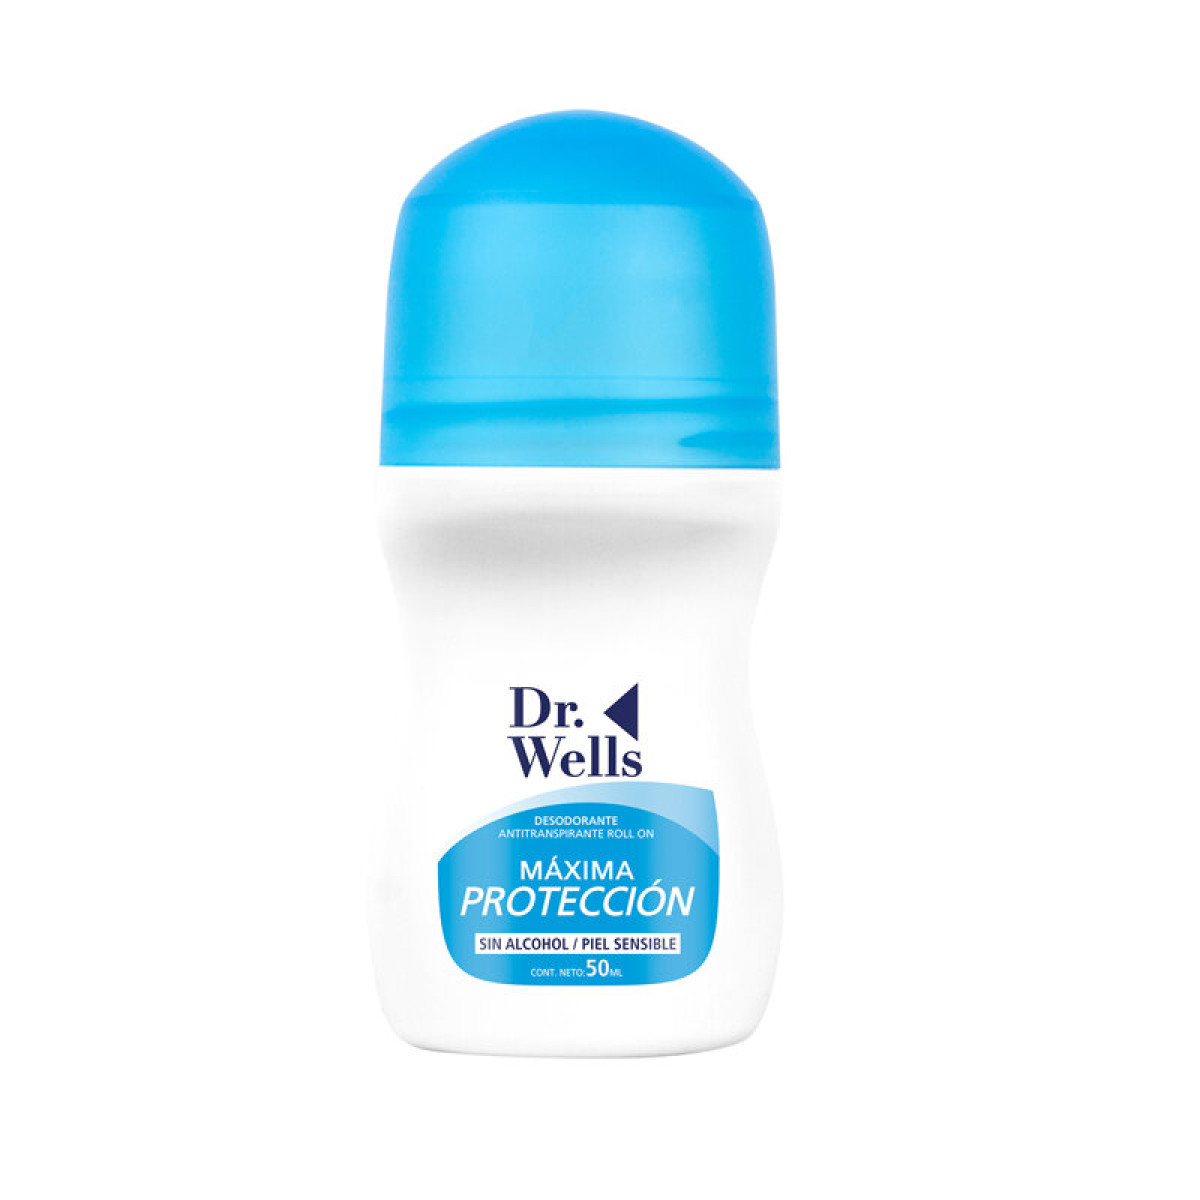 DR WELLS DEO ROLLON 50 ML MAX/PROT